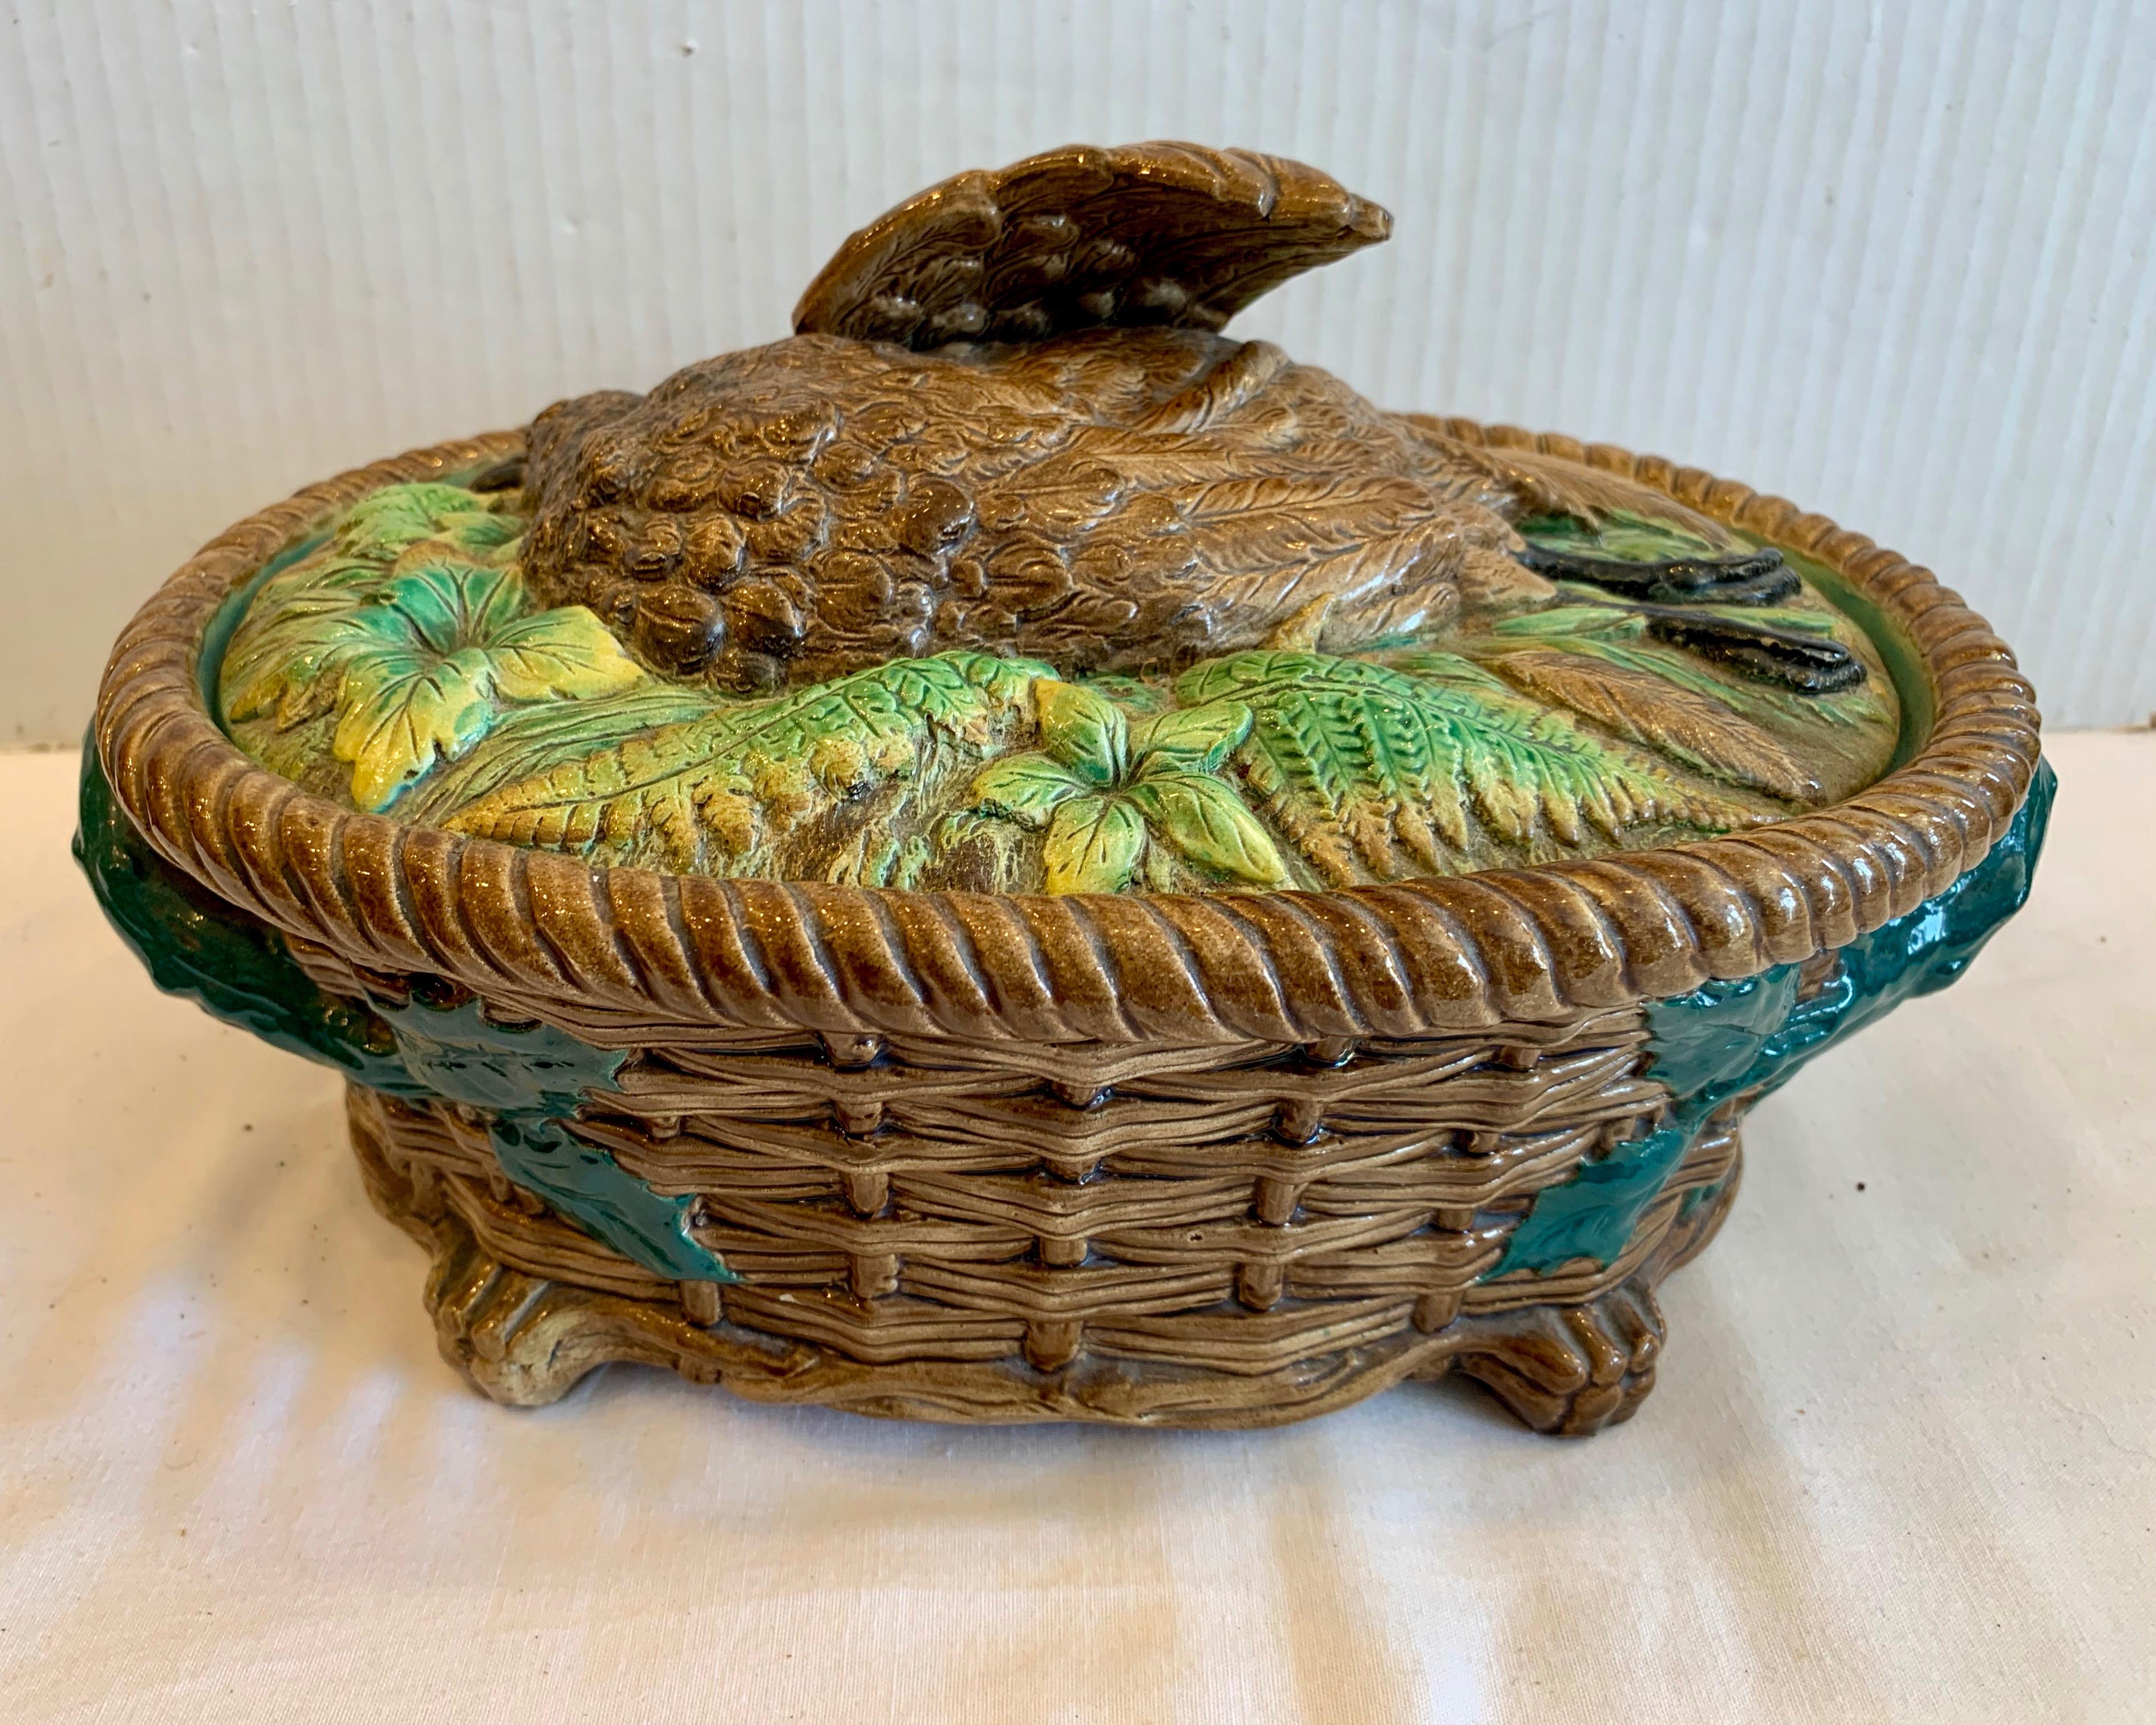 Fashioned with a figure of a bird on its lid. The piece is designed with handles at its sides ,as well. Generously scaled with exceptional detail - highly stylized
with good colors